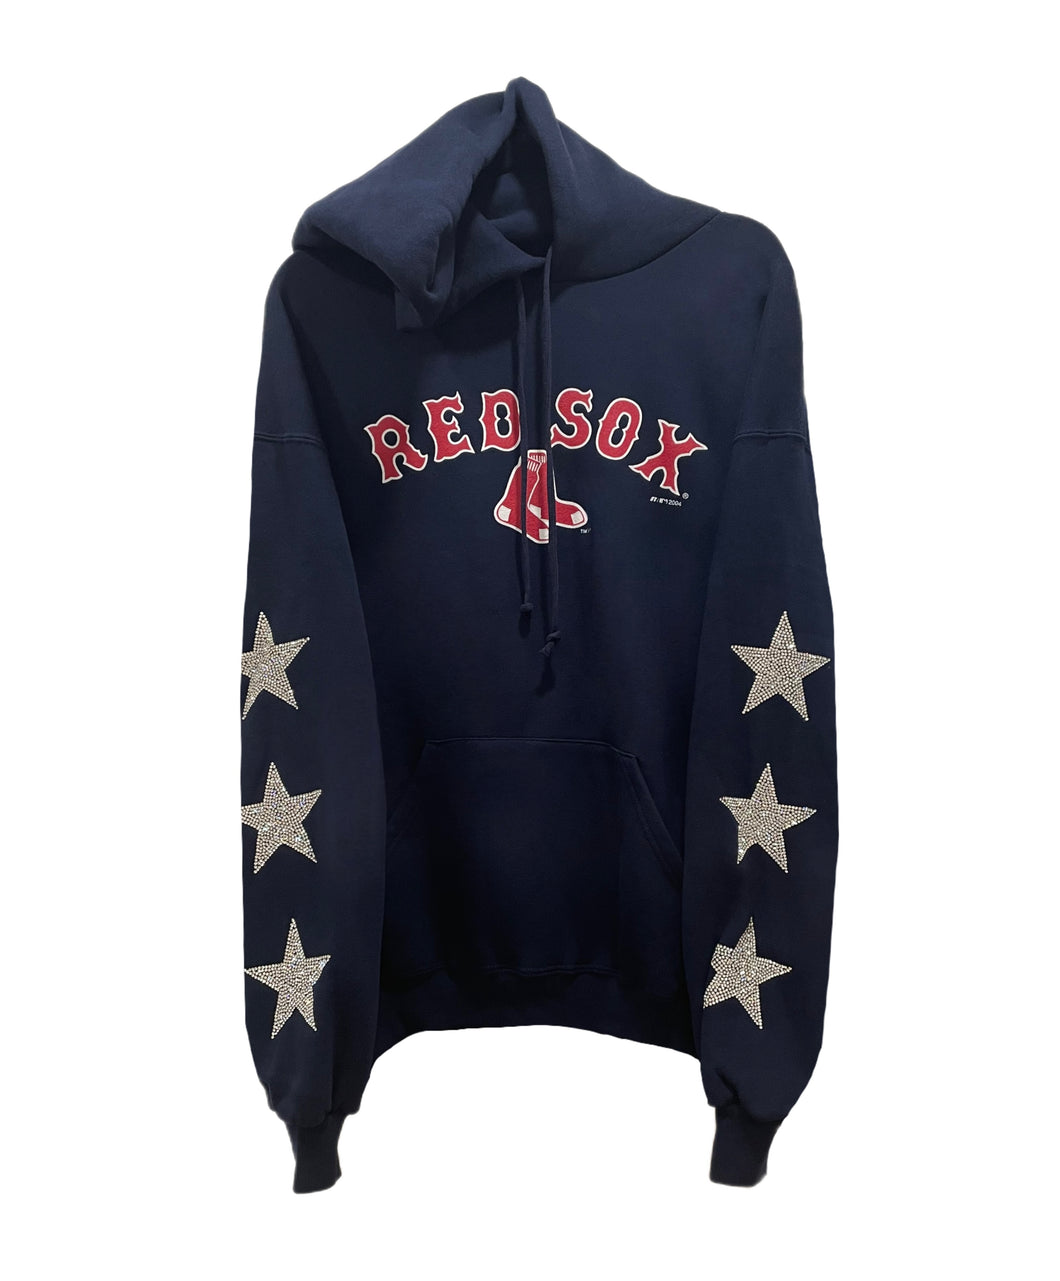 Boston Red Sox, MLB One of a KIND Vintage hoodie with Three Crystal Star Design